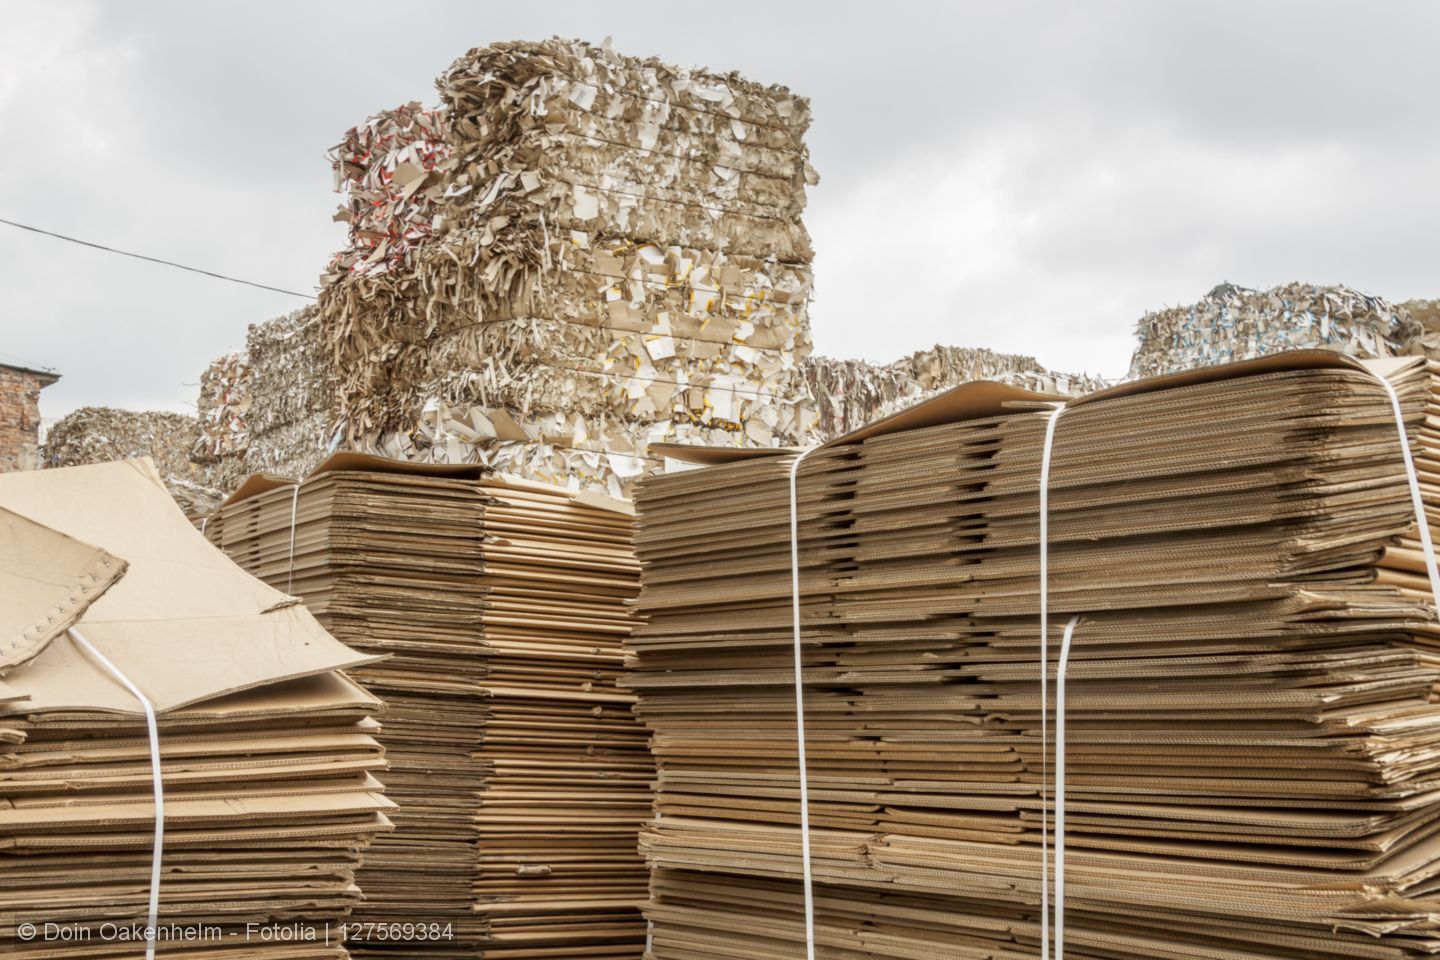 Crisis in the recovered paper sector: ERPA calls for urgent action